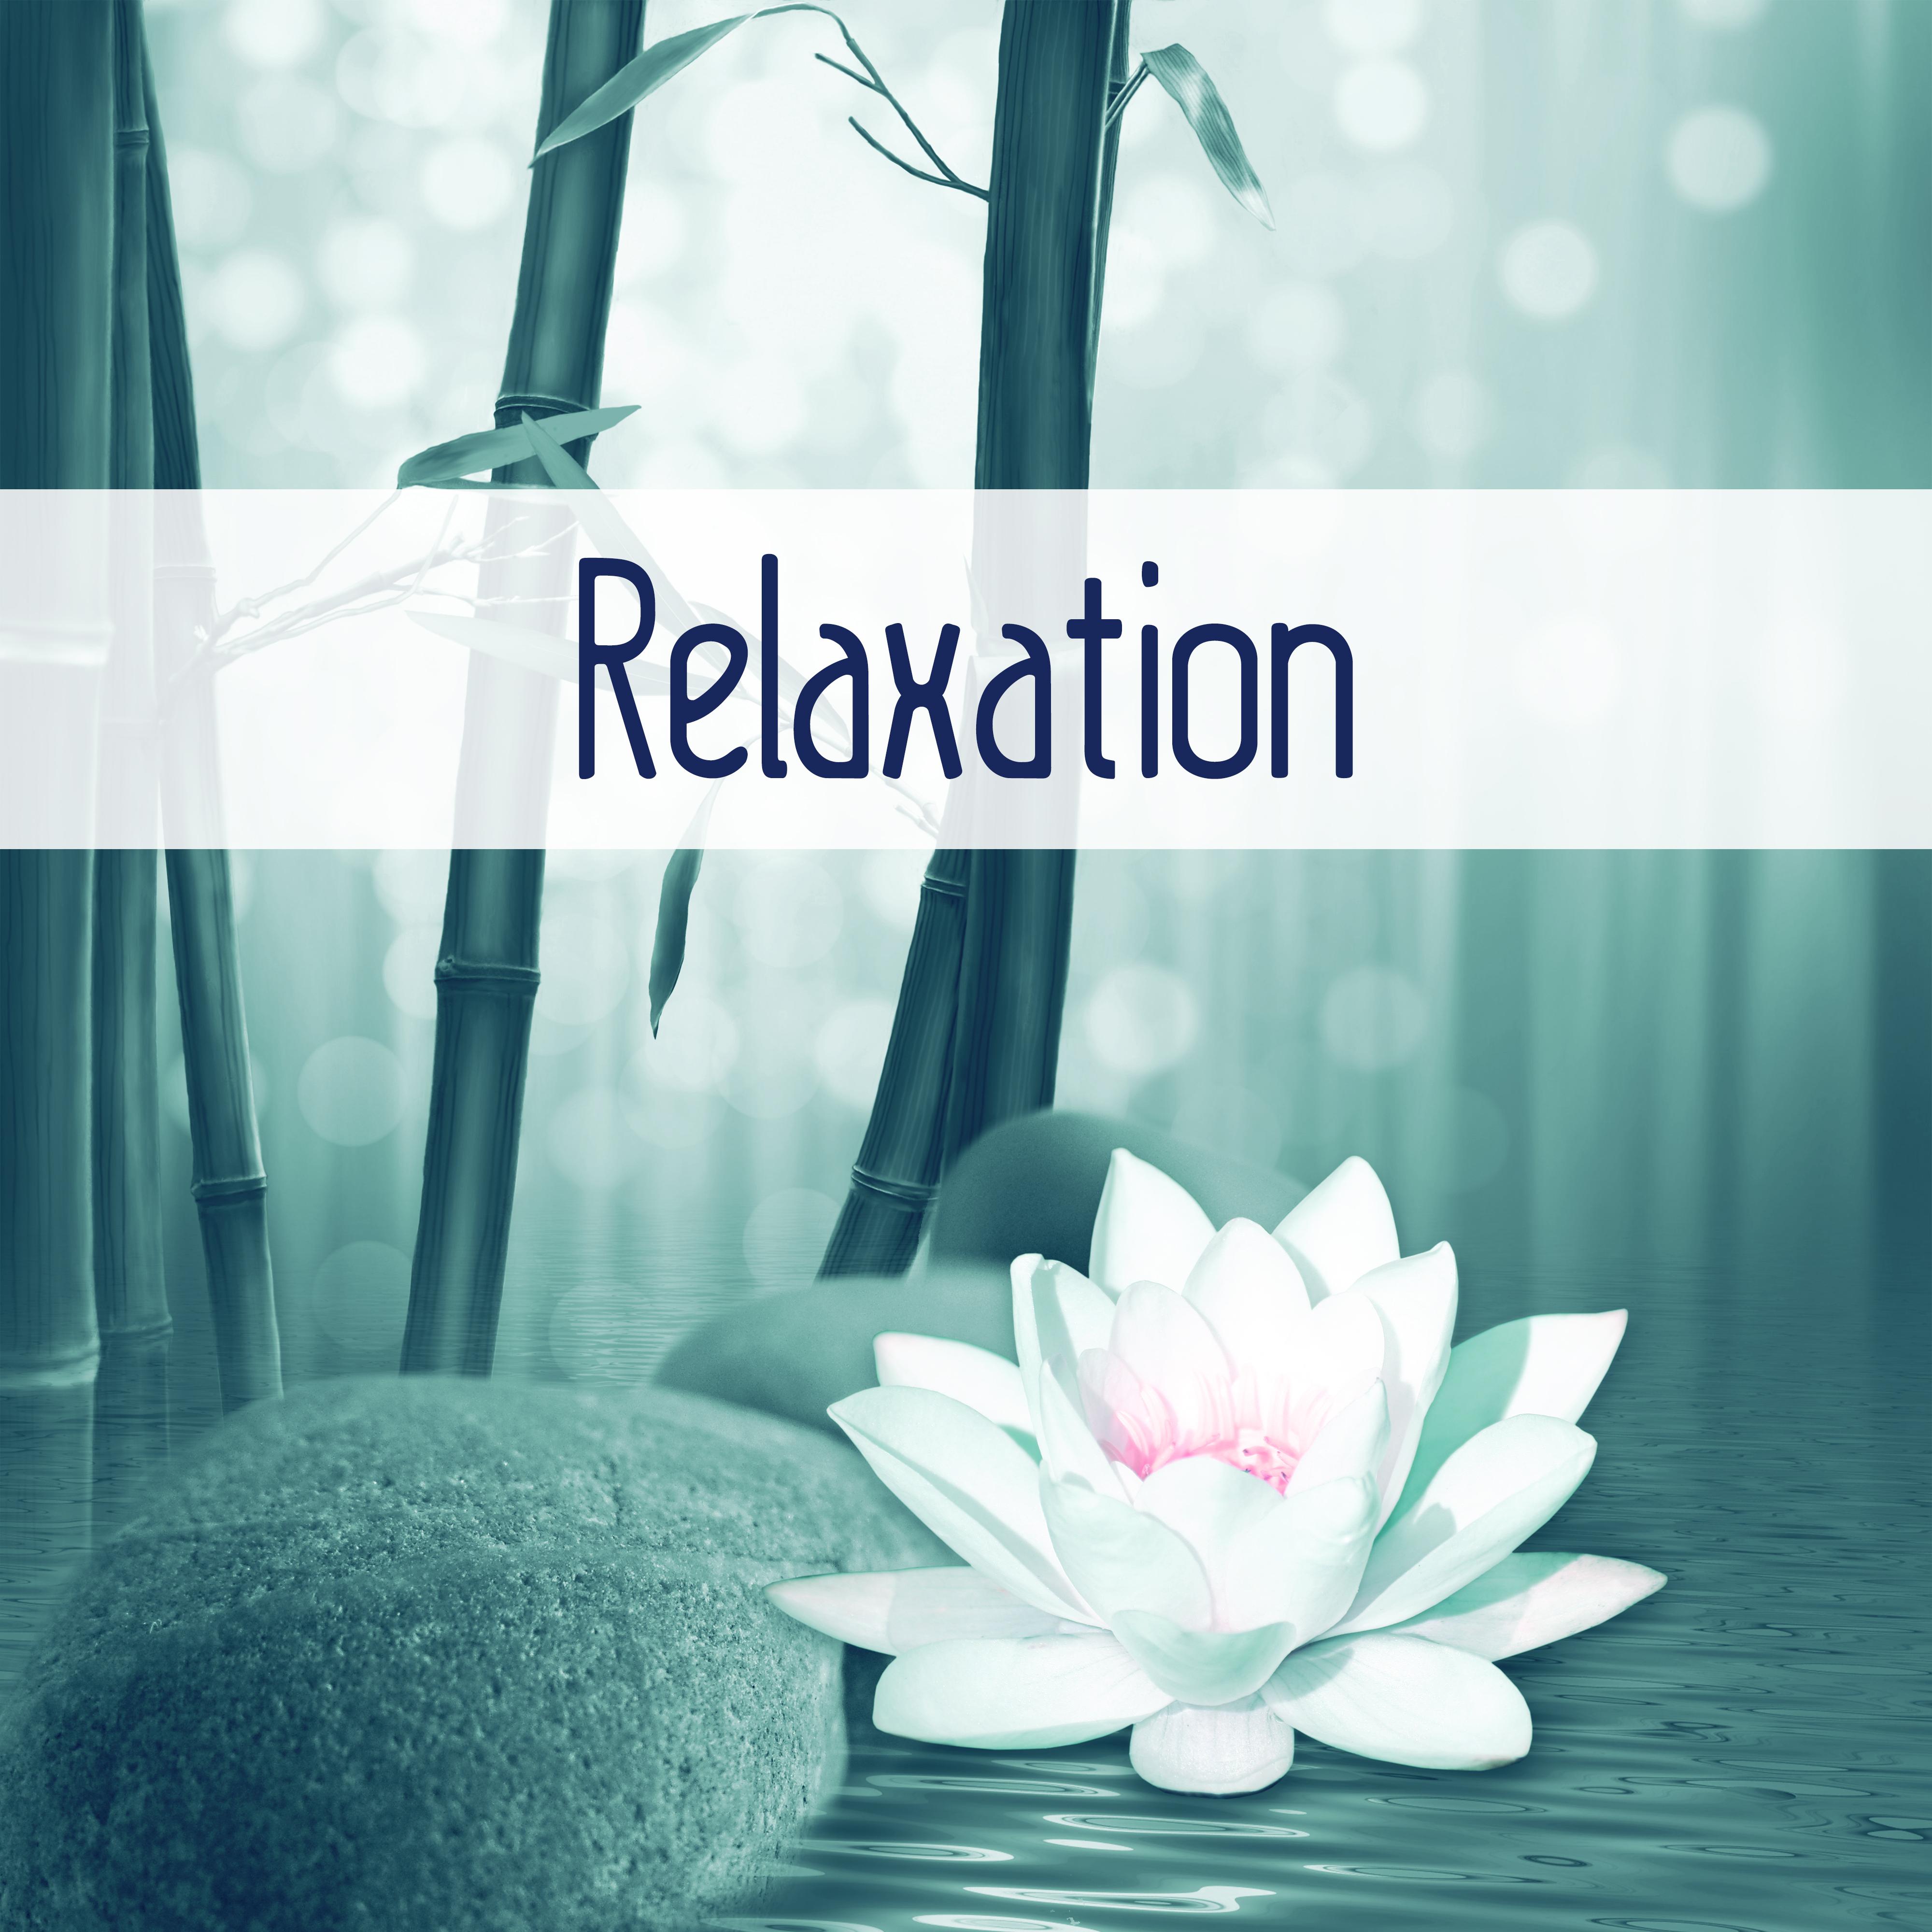 Relaxation  Spa Music, Well Being, Rest, Peaceful Music, Morning Meditation, New Age, Water Sounds